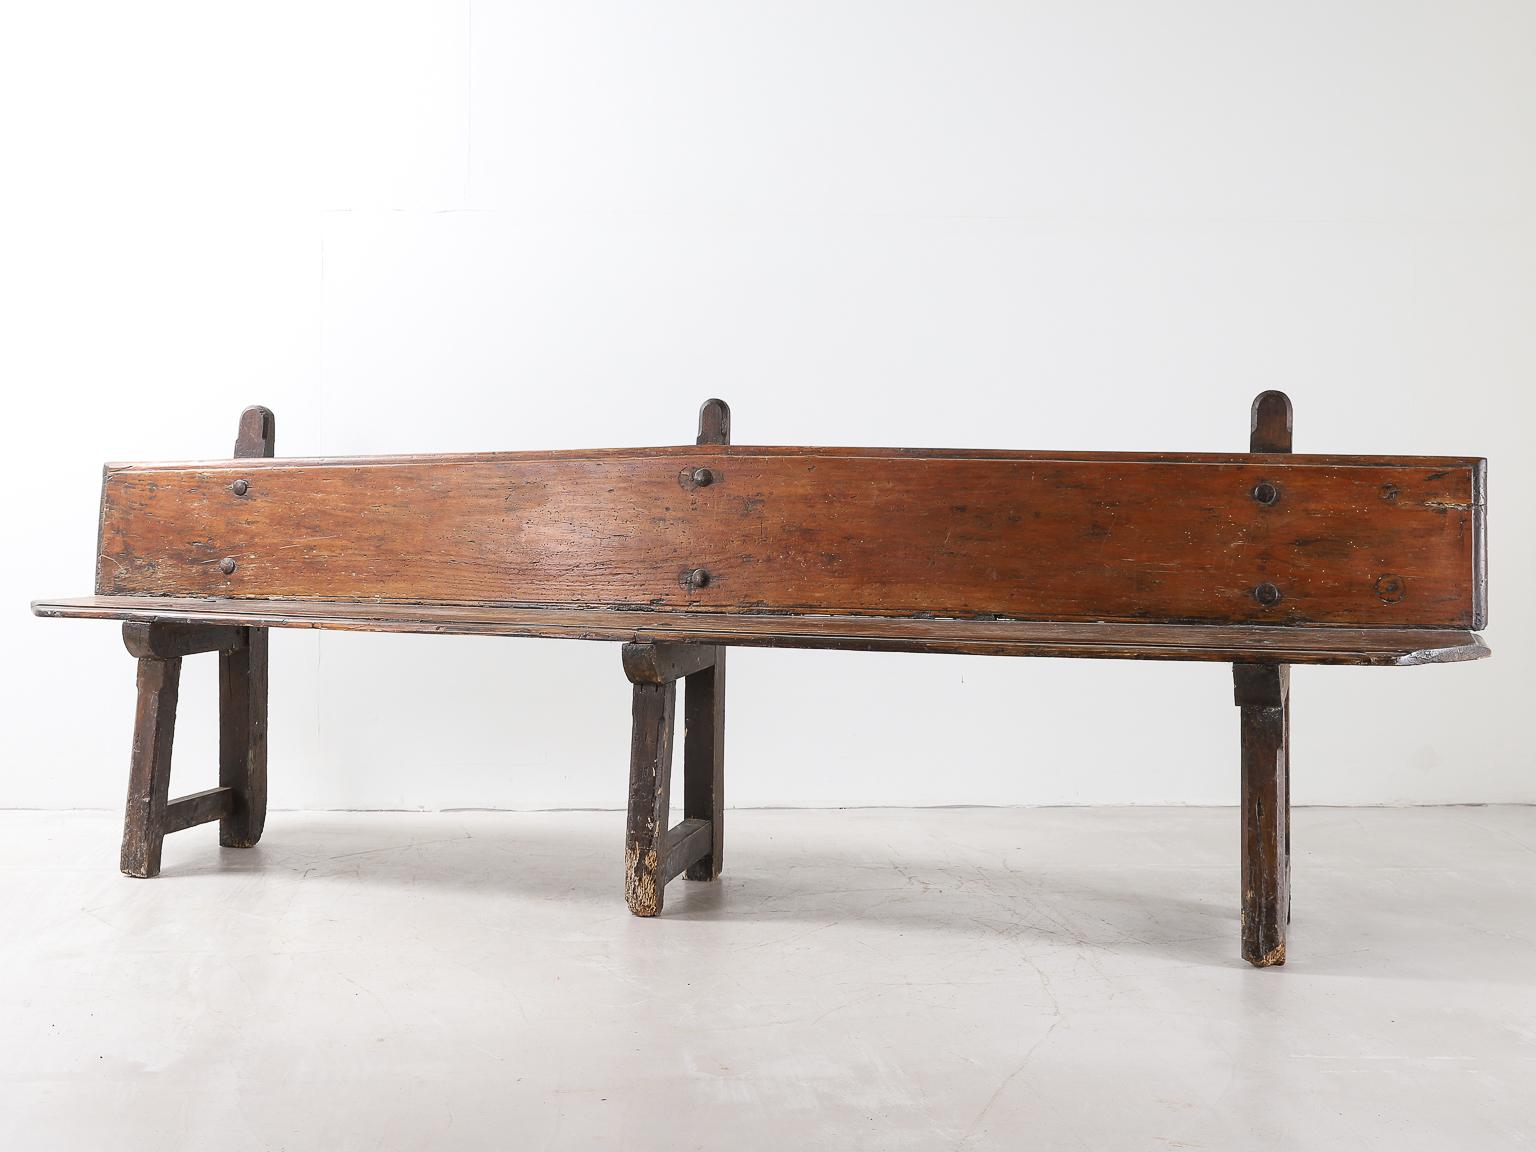 Spanish 18th Century Bench with Iron Rivets In Good Condition For Sale In London, Charterhouse Square